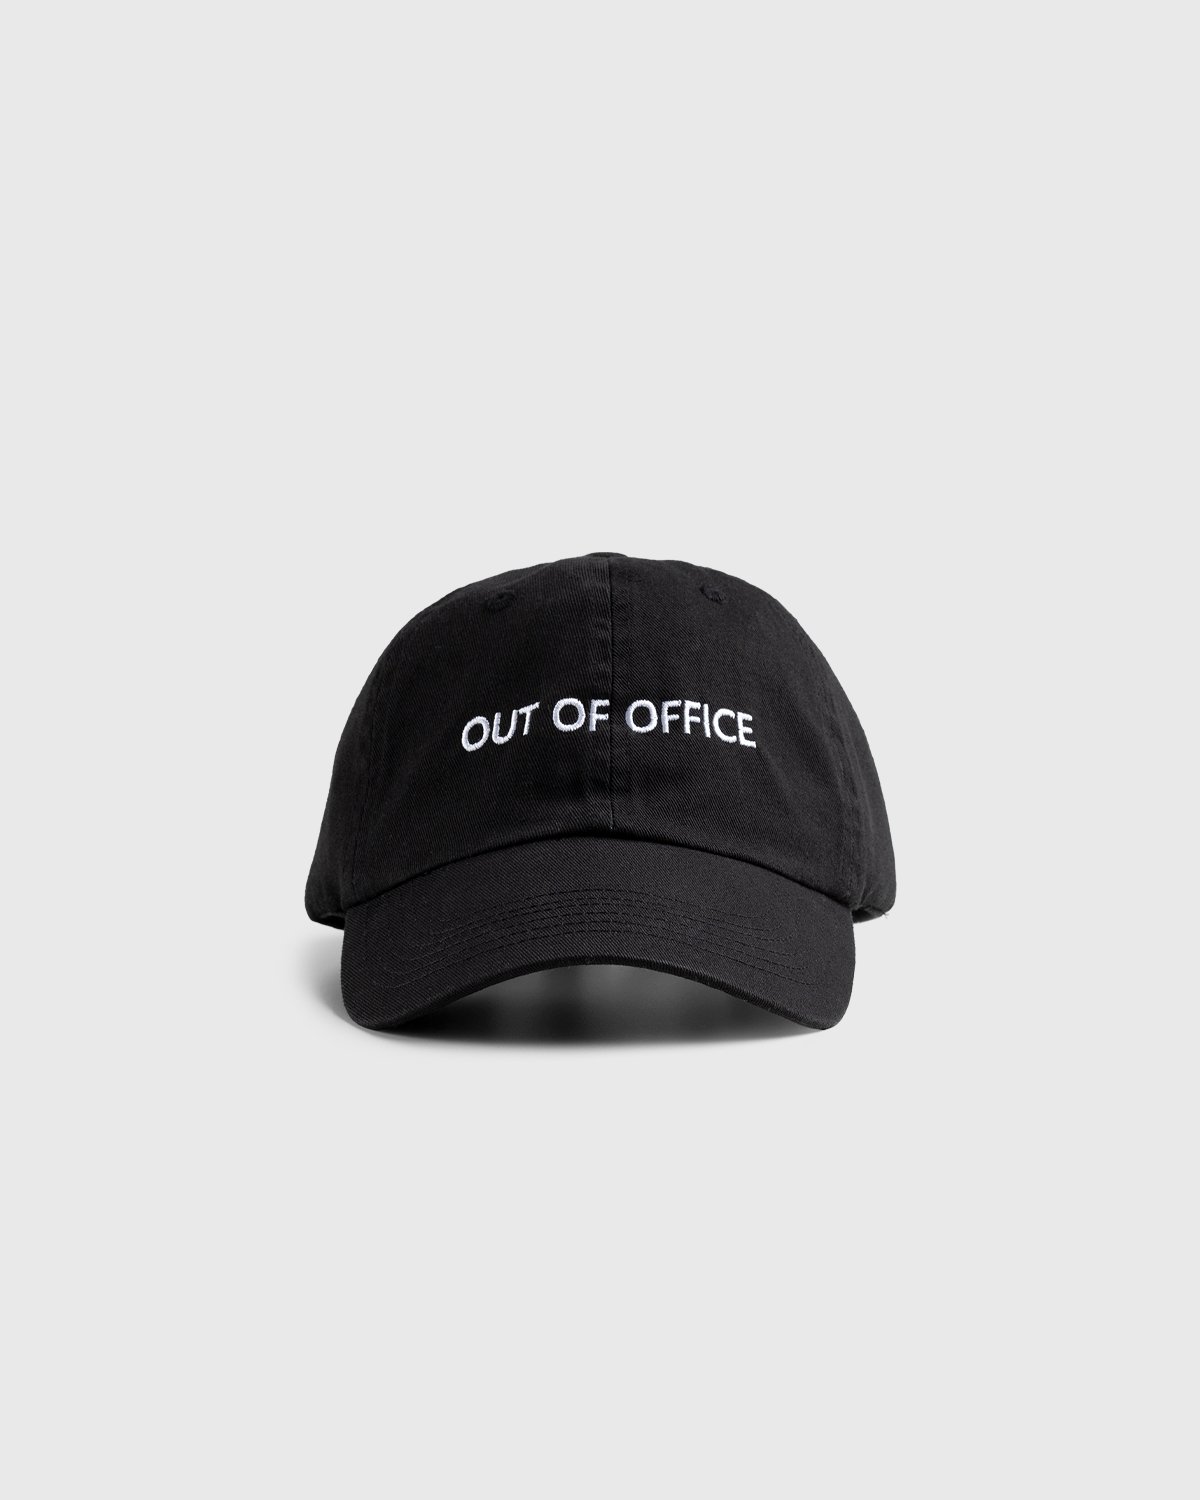 HO HO COCO - Out of Office Cap Black - Accessories - Black - Image 2